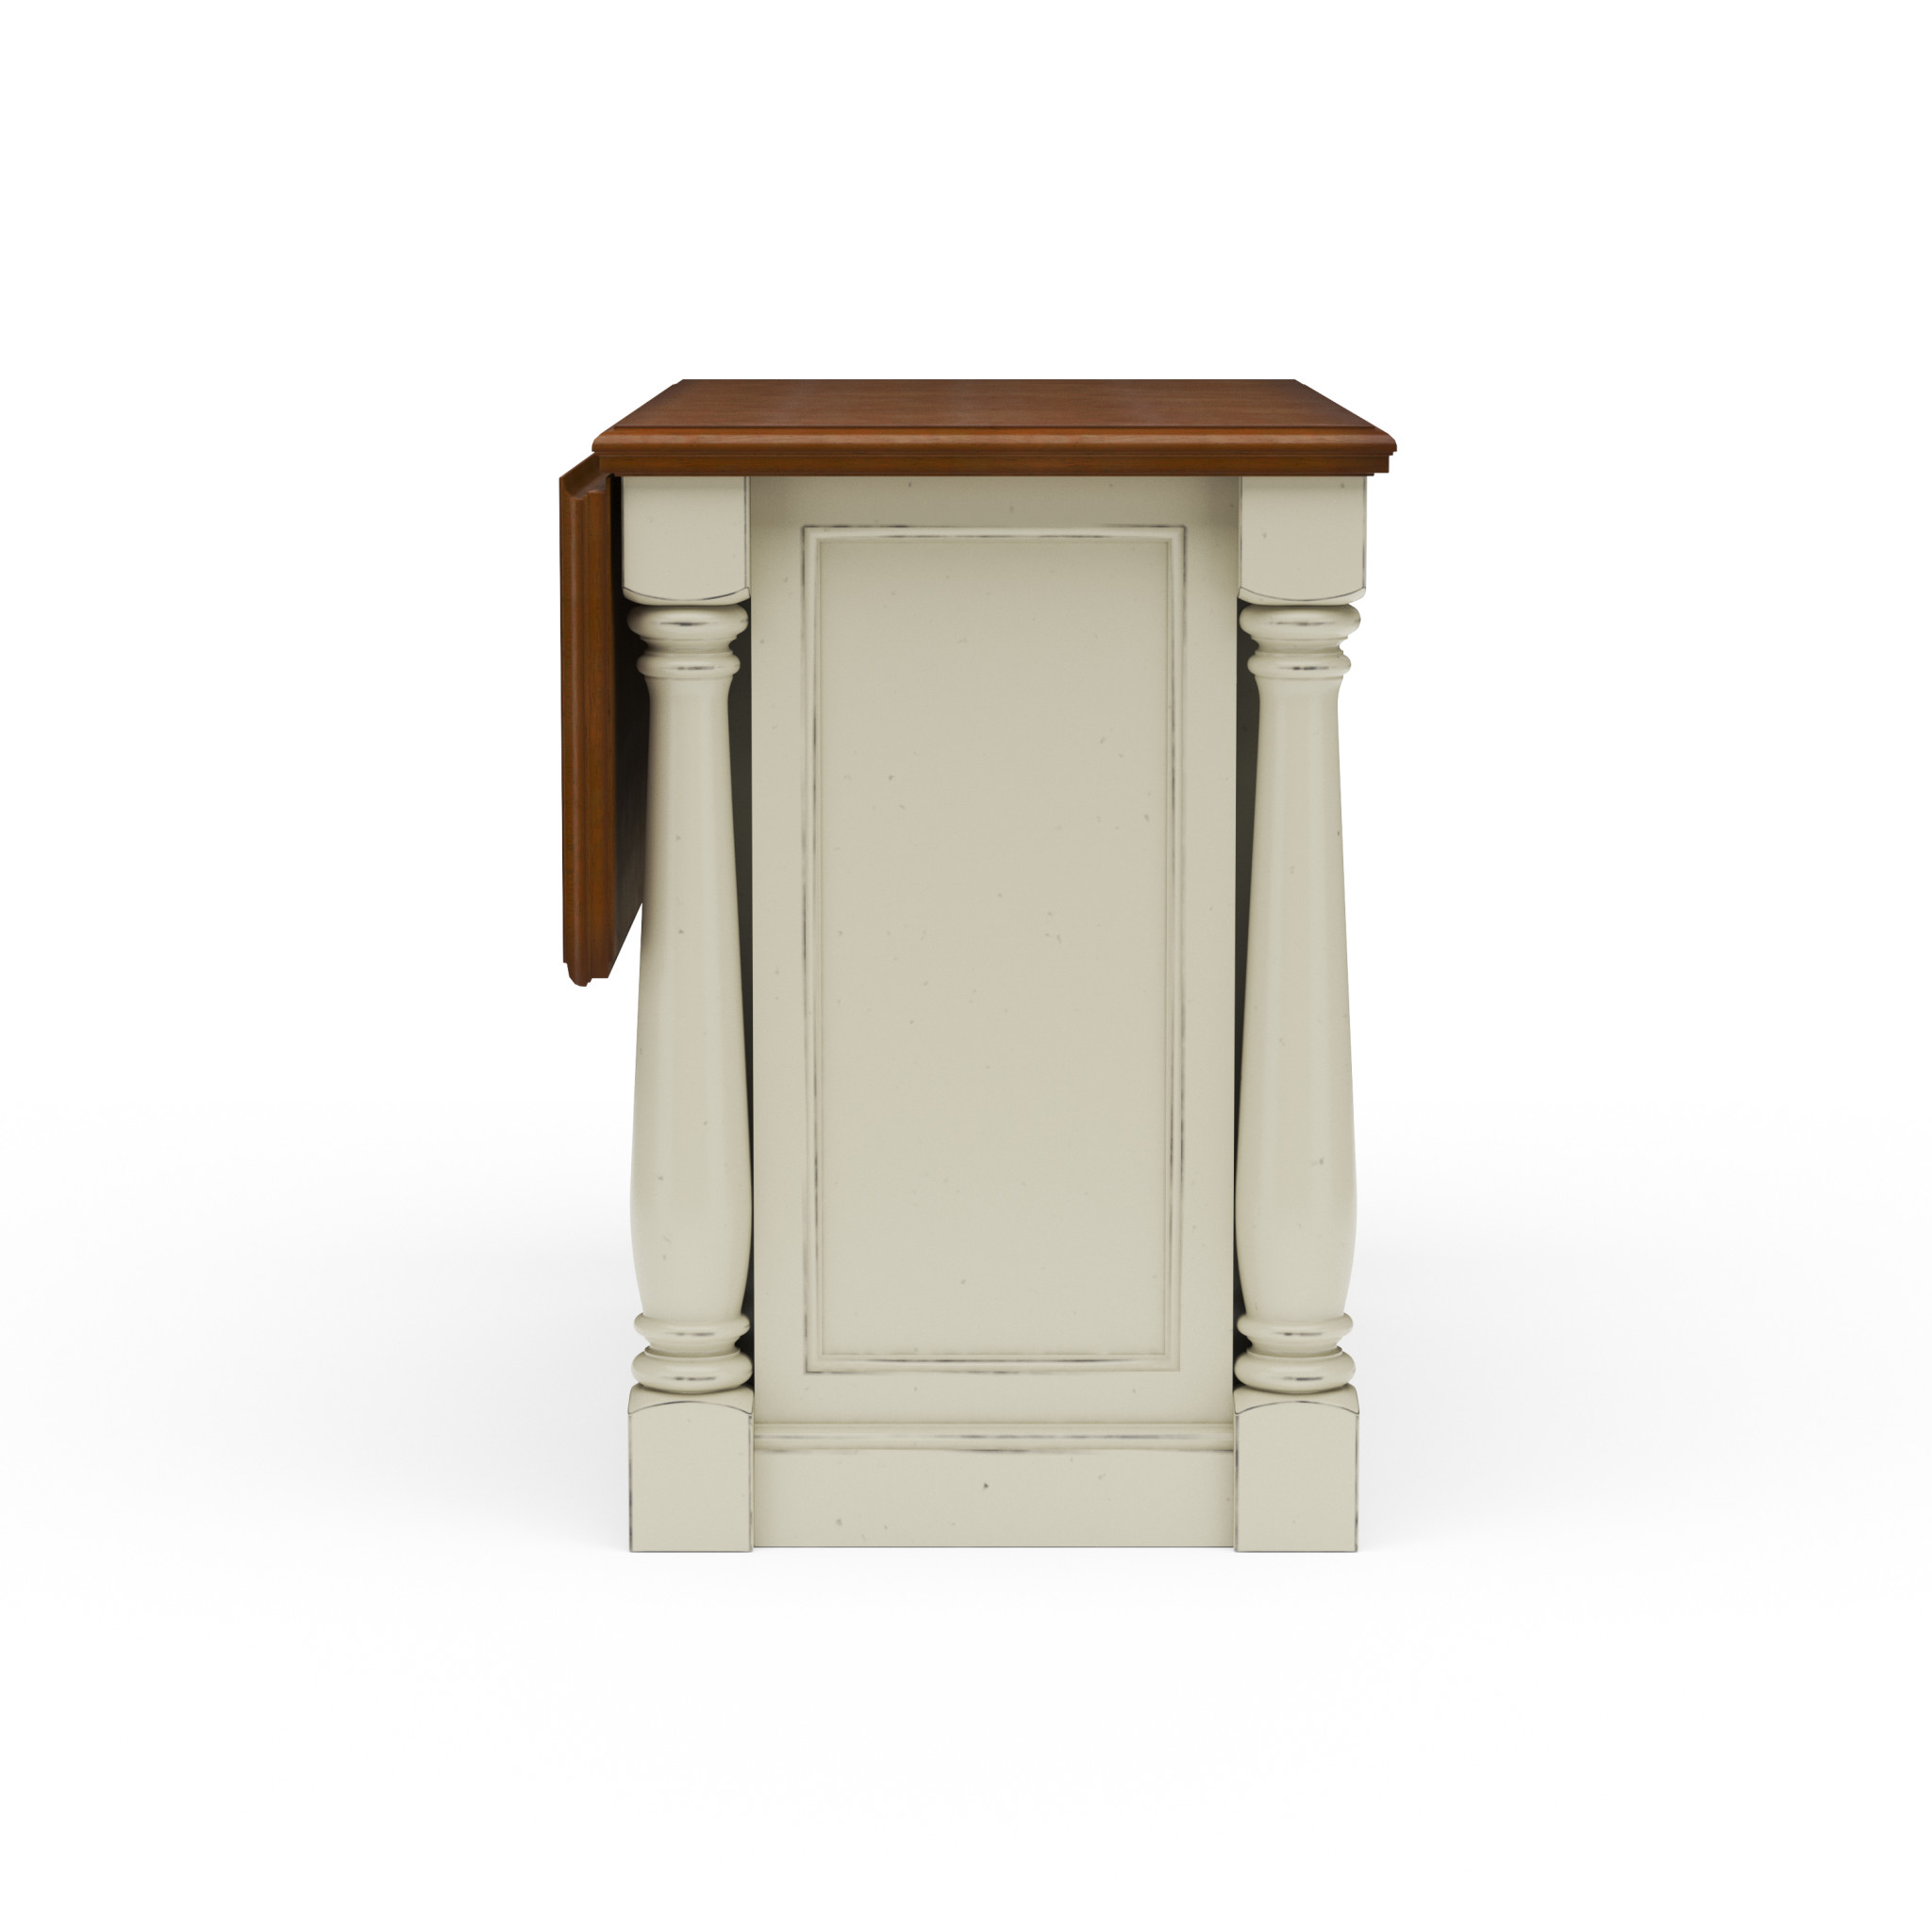 Homestyles Monarch Wood Kitchen Island in Off White - image 2 of 7